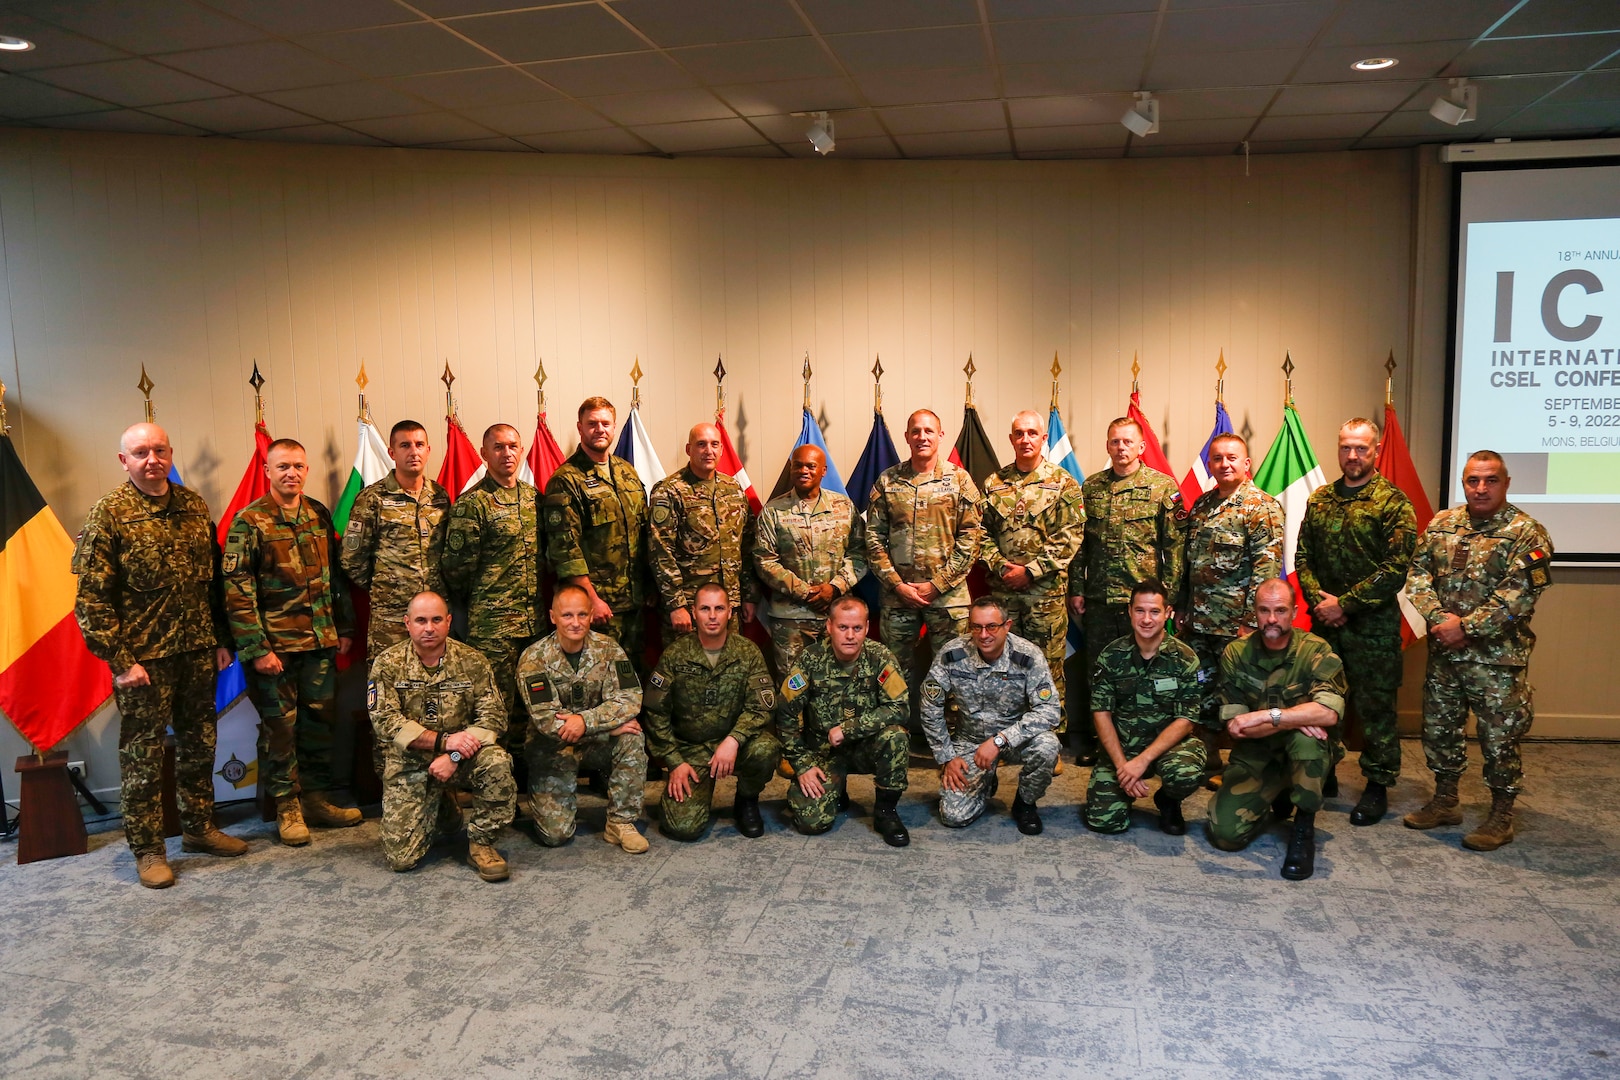 Senior Enlisted Advisor Tony L. Whitehead, the senior enlisted advisor to the chief, National Guard Bureau, center, and Command Sgt. Maj. John Raines, the Army National Guard command sergeant major, center right, stand for a photo with European command senior enlisted leaders during the 18th Annual International CSEL Conference at Supreme Headquarters Allied Powers Europe, Casteau, Belgium, Sept. 8, 2022.